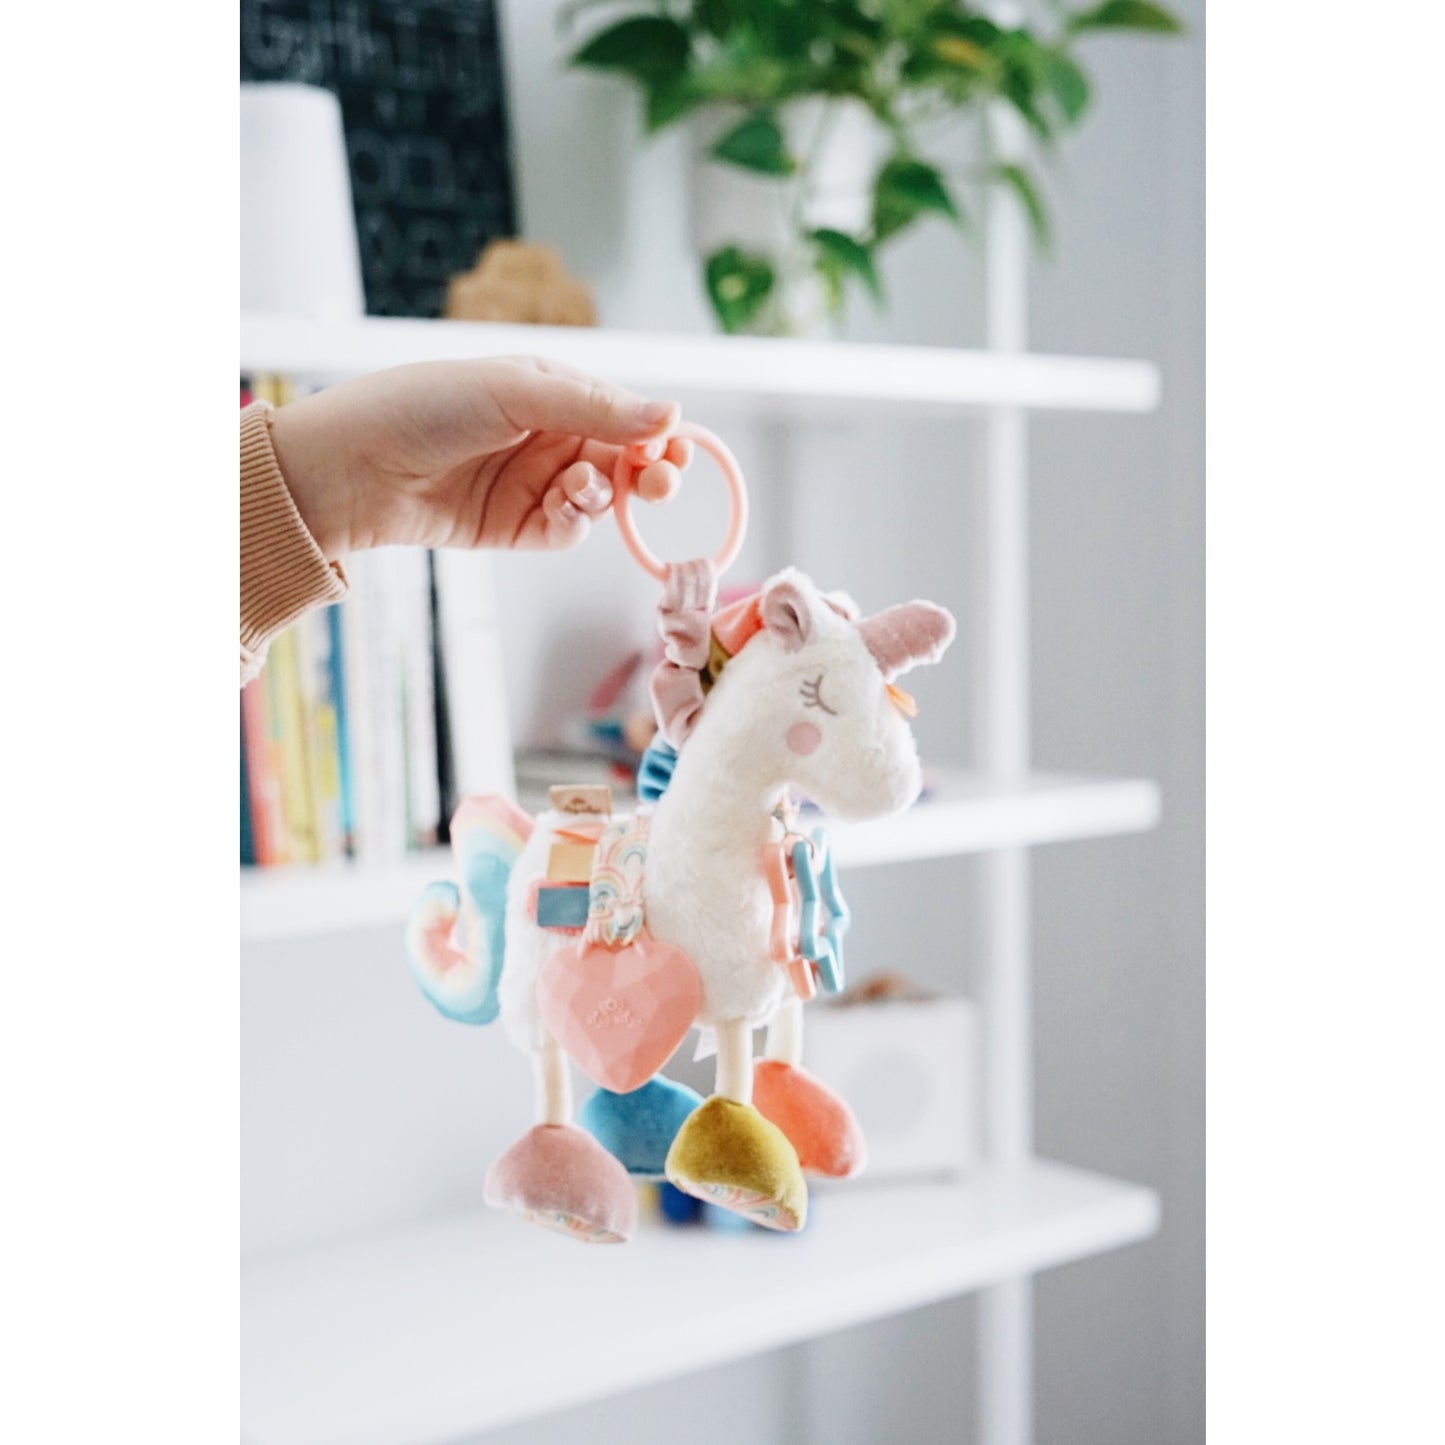 Itzy Ritzy - Link & Love™ Unicorn Activity Plush Silicone Teether Toy